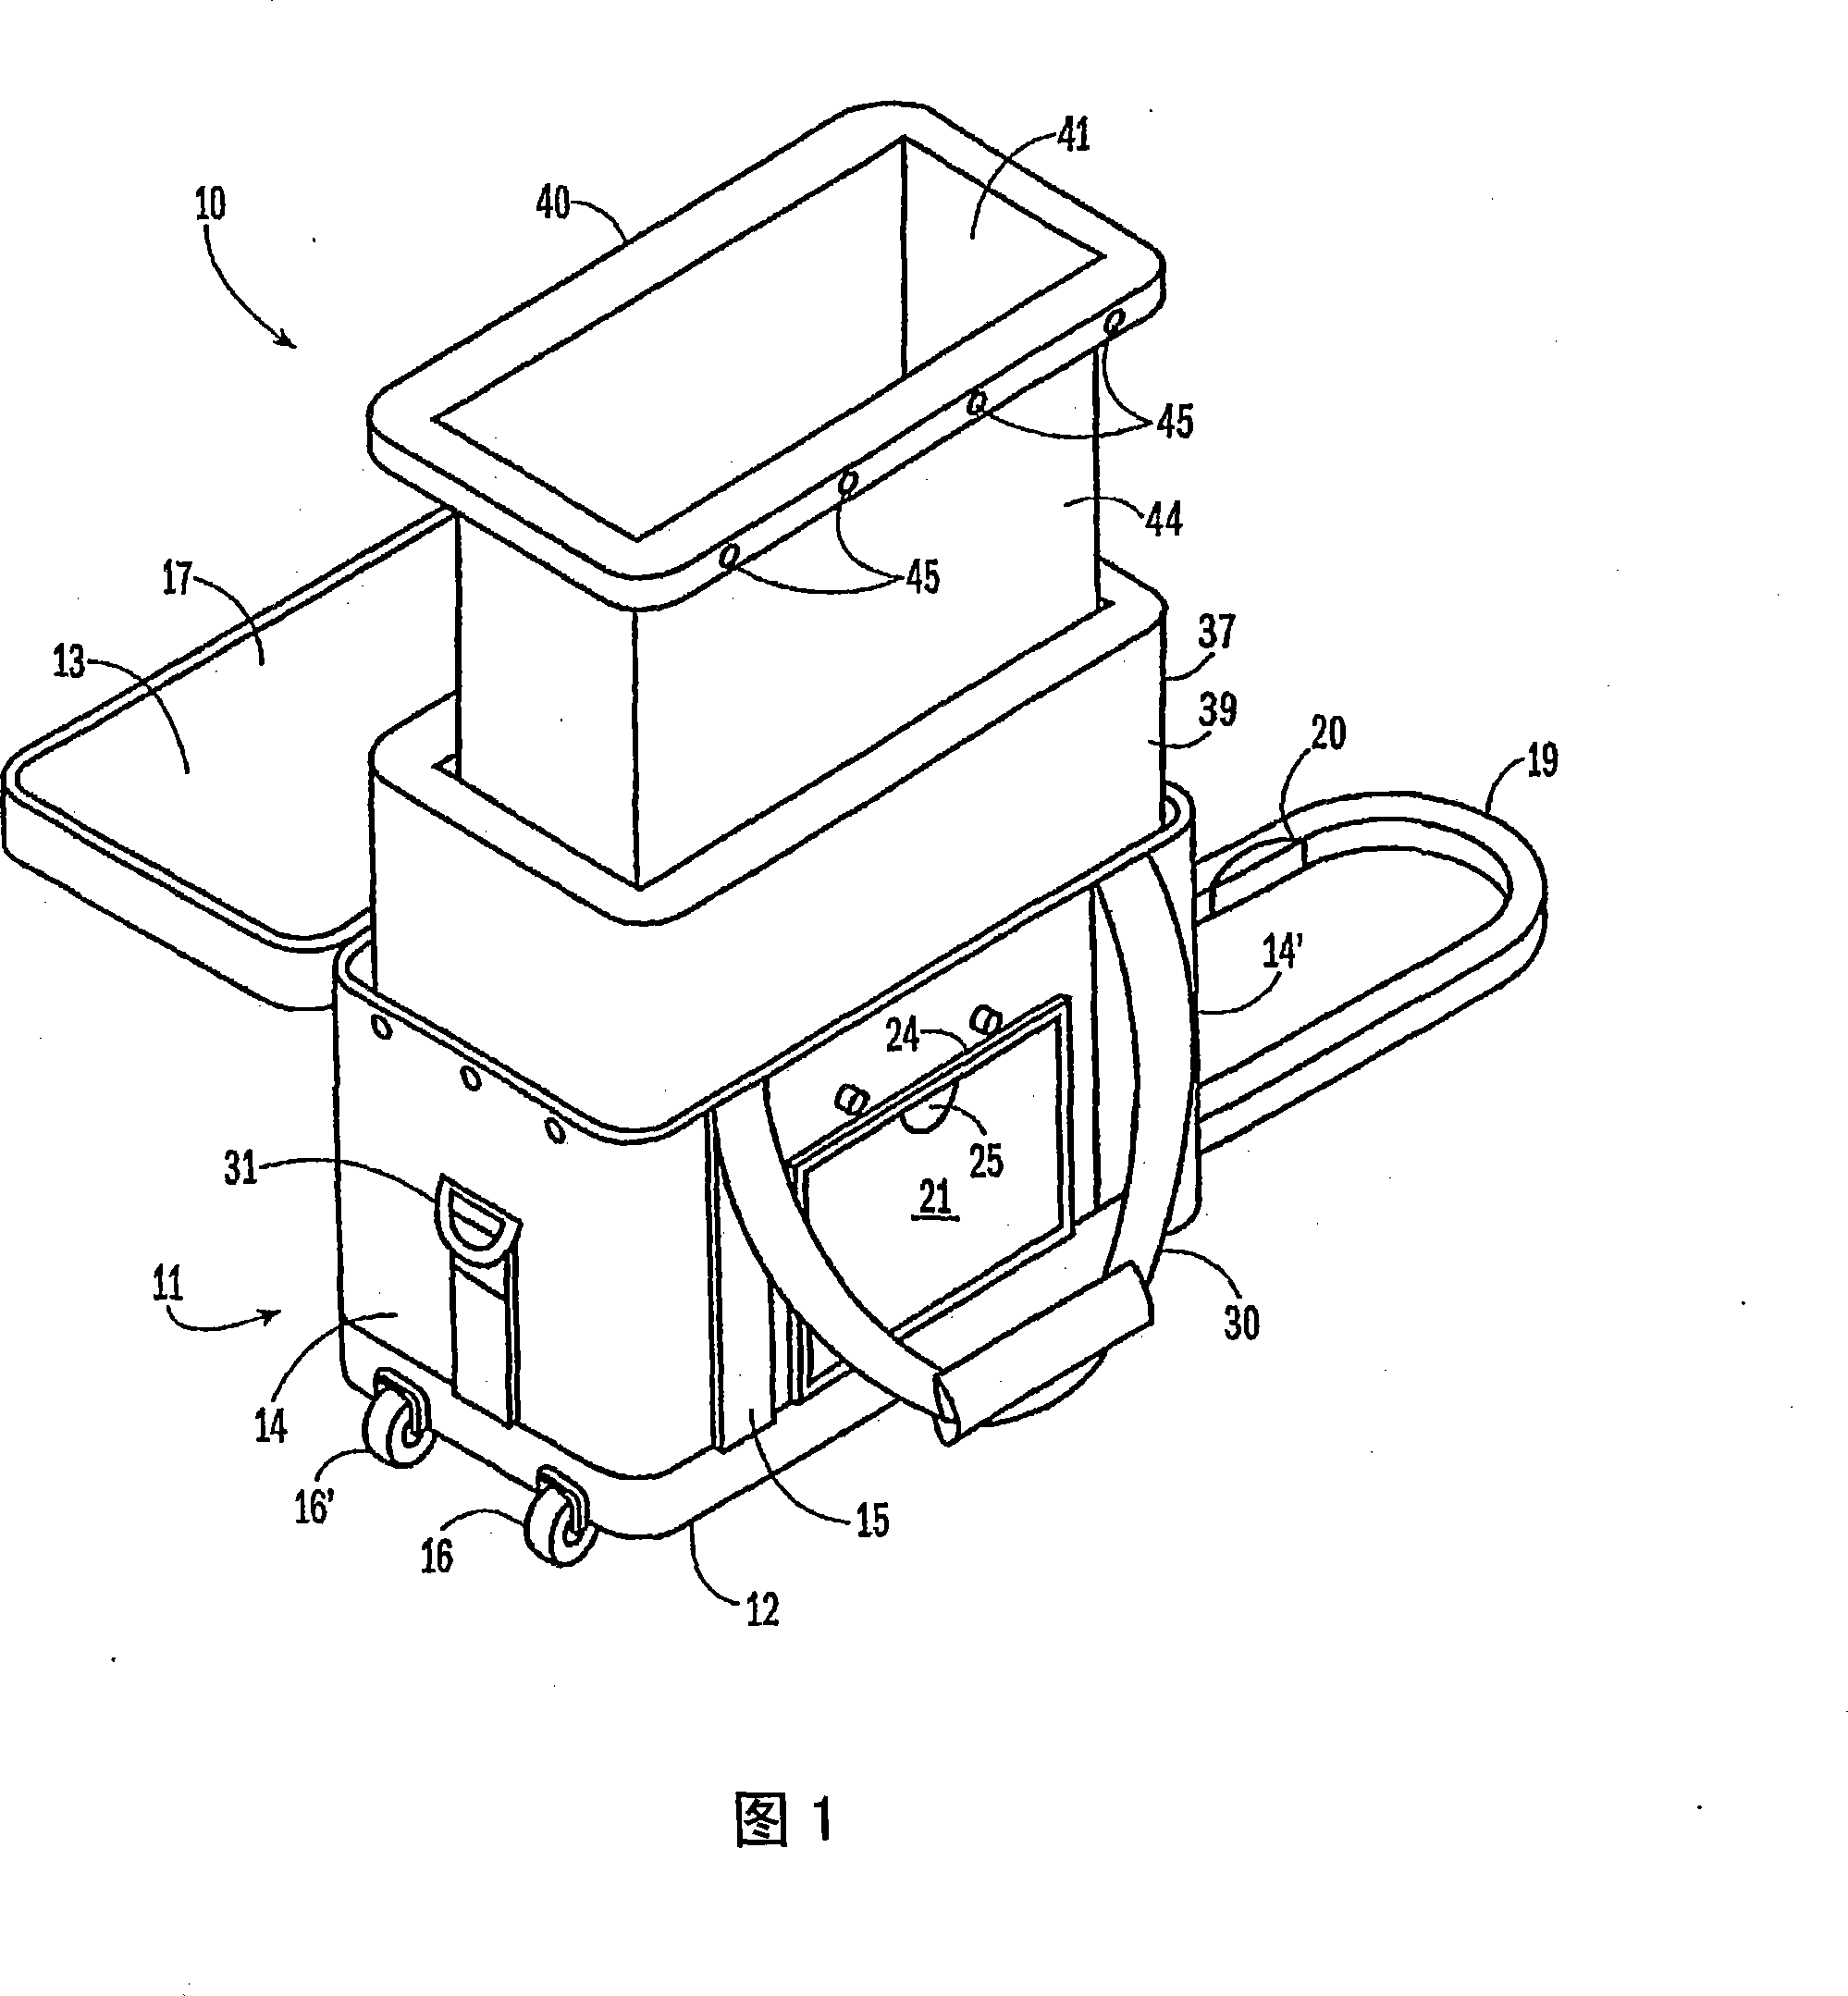 Container for transporting temperature controlled items